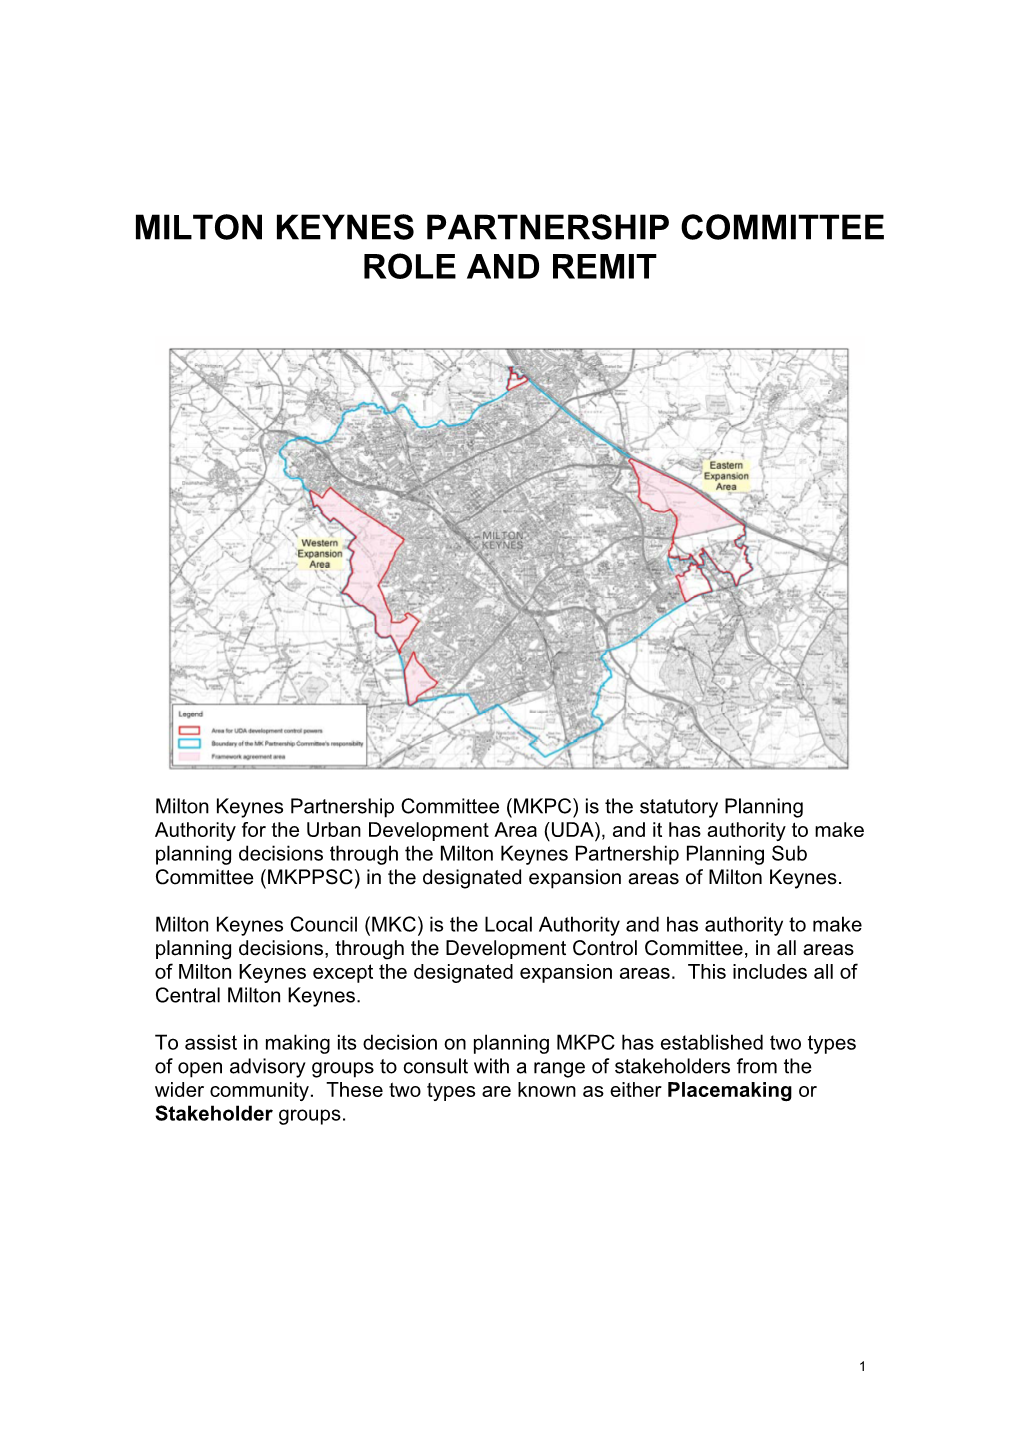 Milton Keynes Partnership Committee Role and Remit